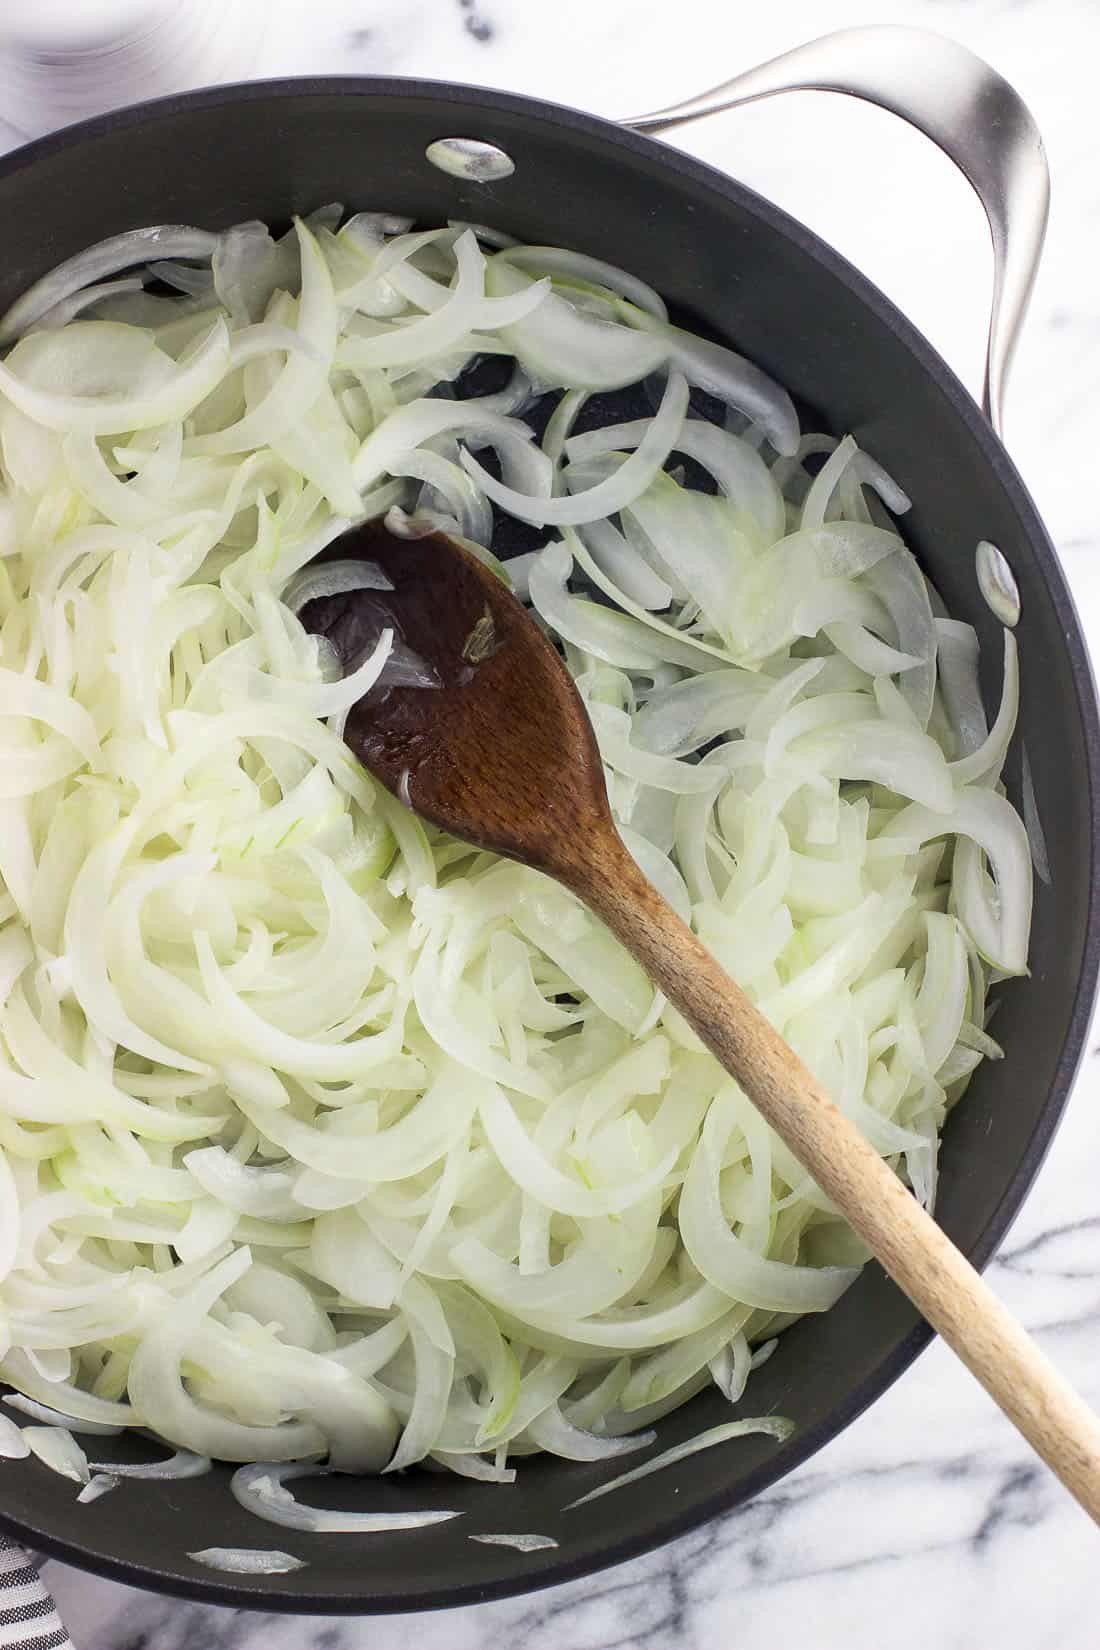 Curious how to make caramelized onions? It's not hard! Three ingredients are all you need to make this simple condiment that takes any meal up a notch. Caramelized onions make a great addition to sandwiches (especially grilled cheeses), salads, omelettes or frittatas, and more.